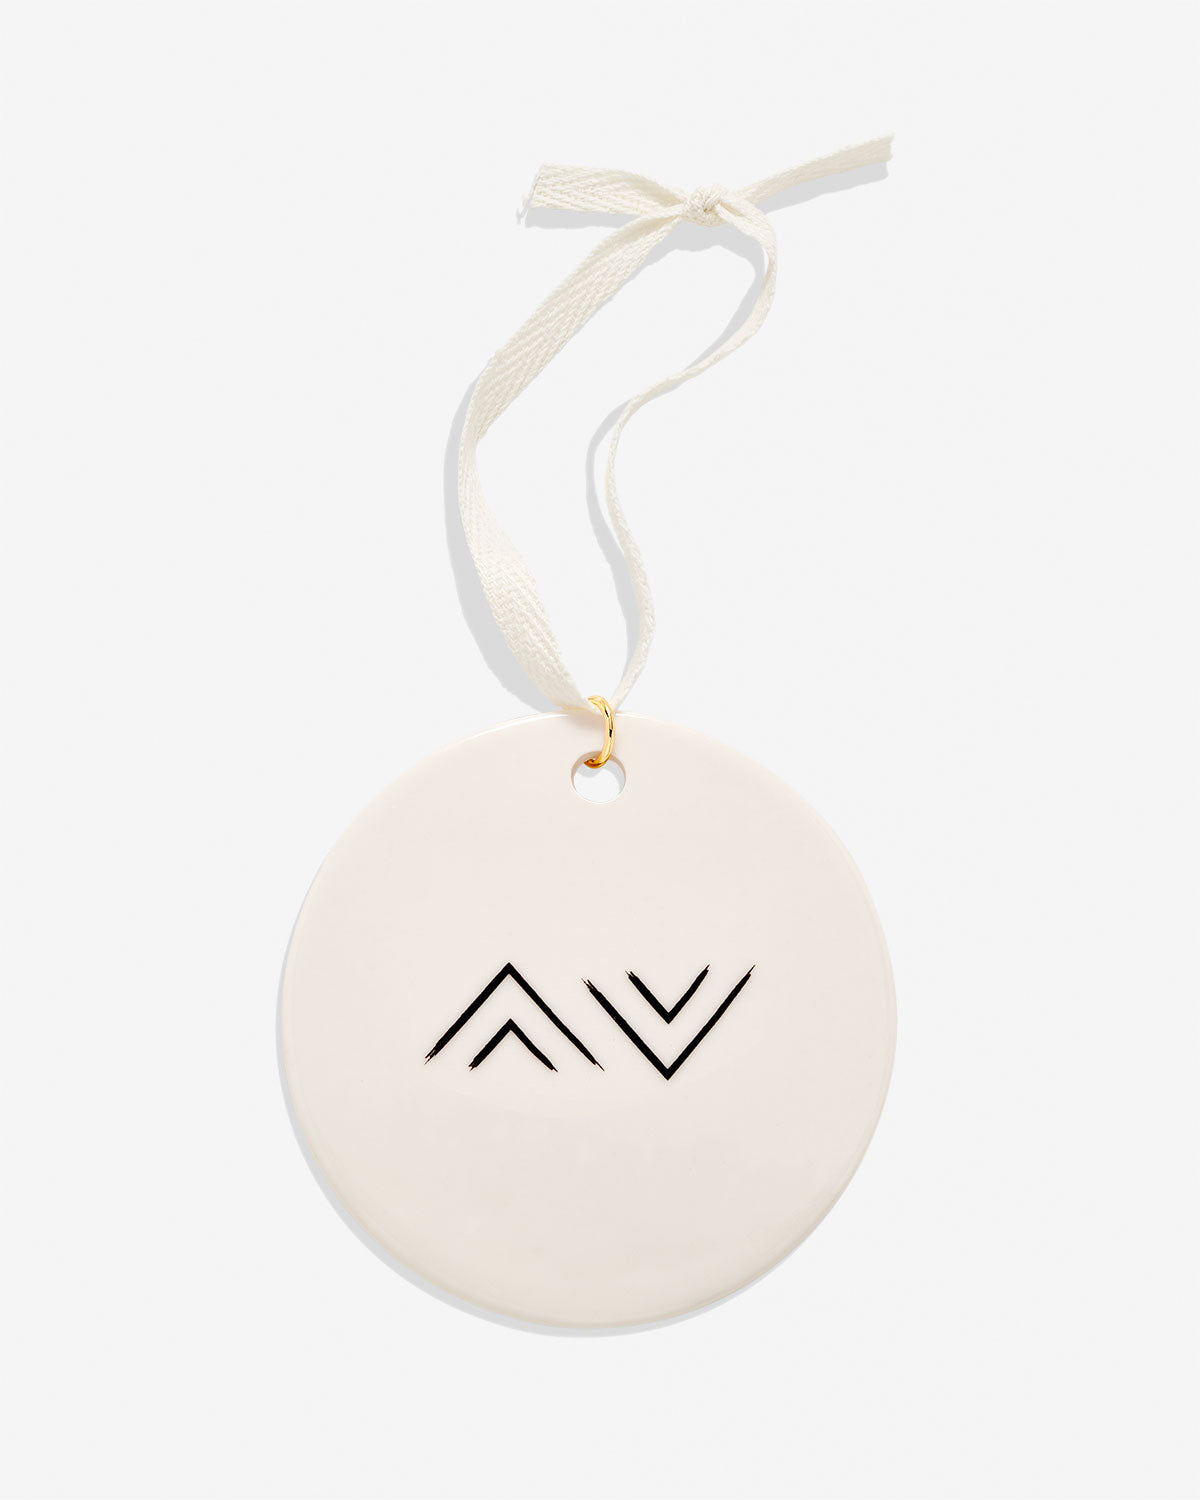 Bryan Anthonys Highs and Lows White Ceramic Holiday Ornament in Black